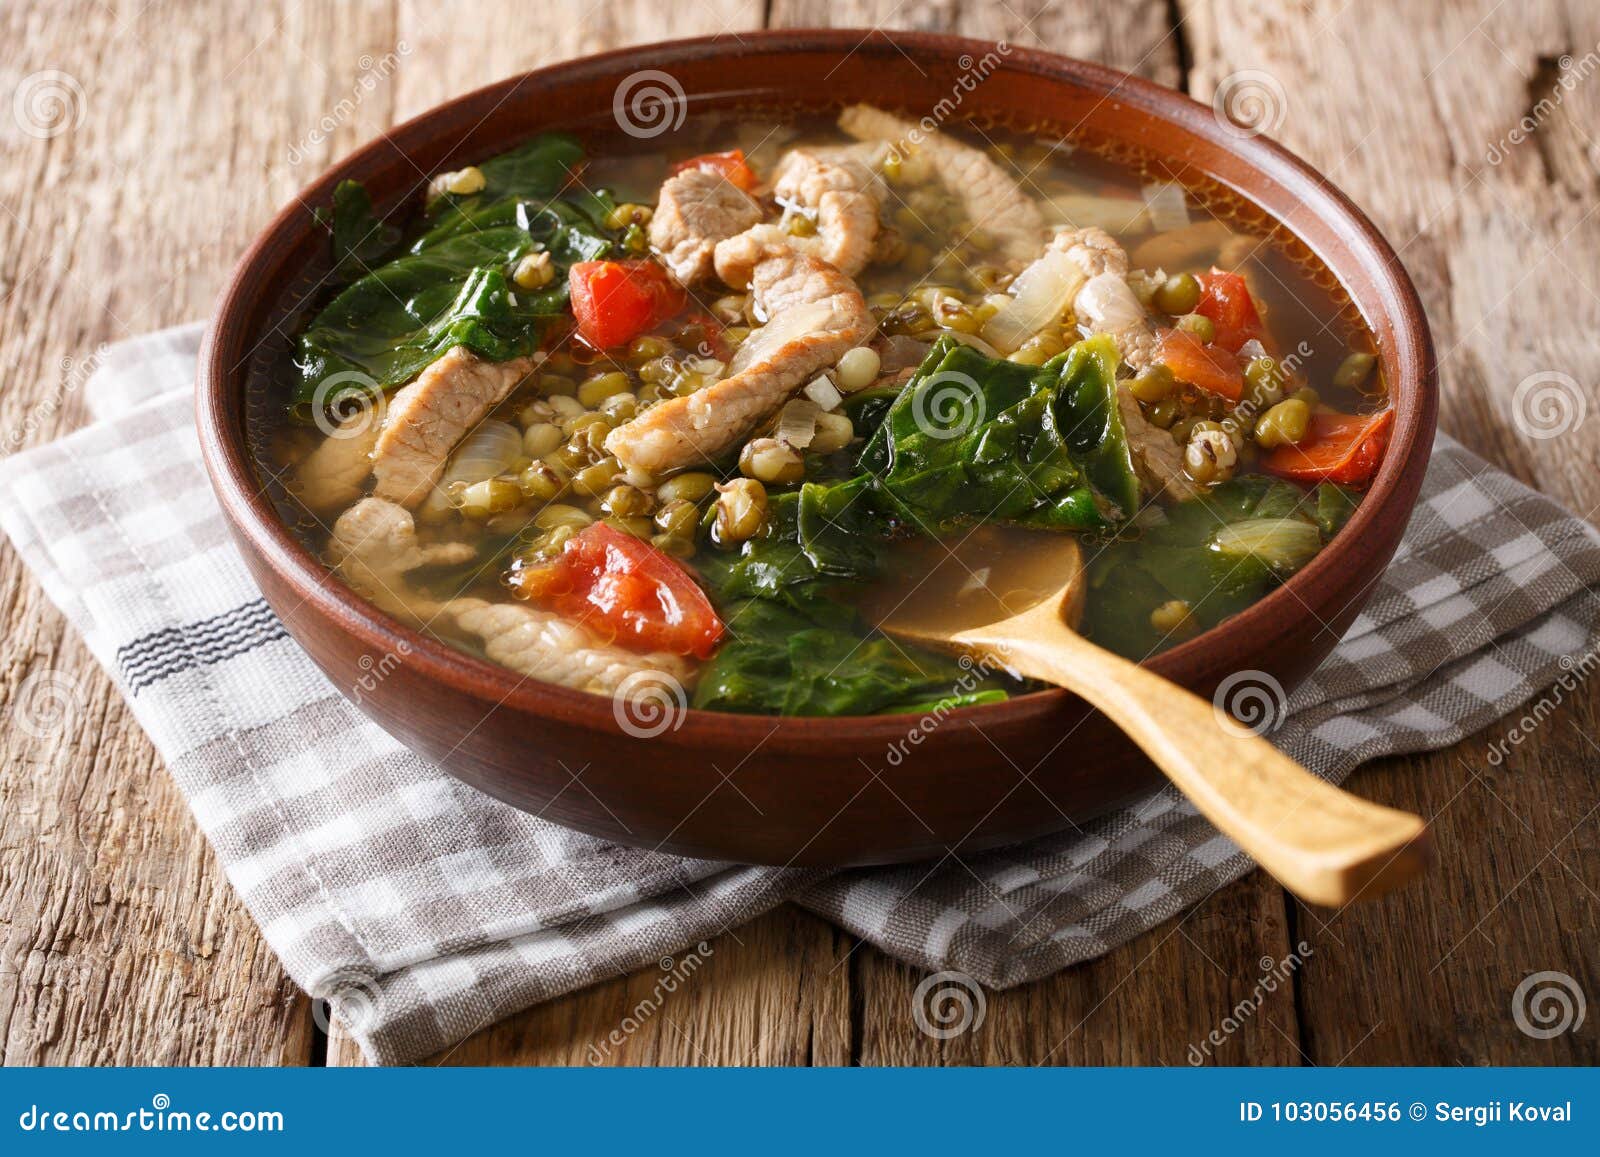 Philippine Mung Beans Soup with Pork Closeup in a Bowl. Horizontal ...